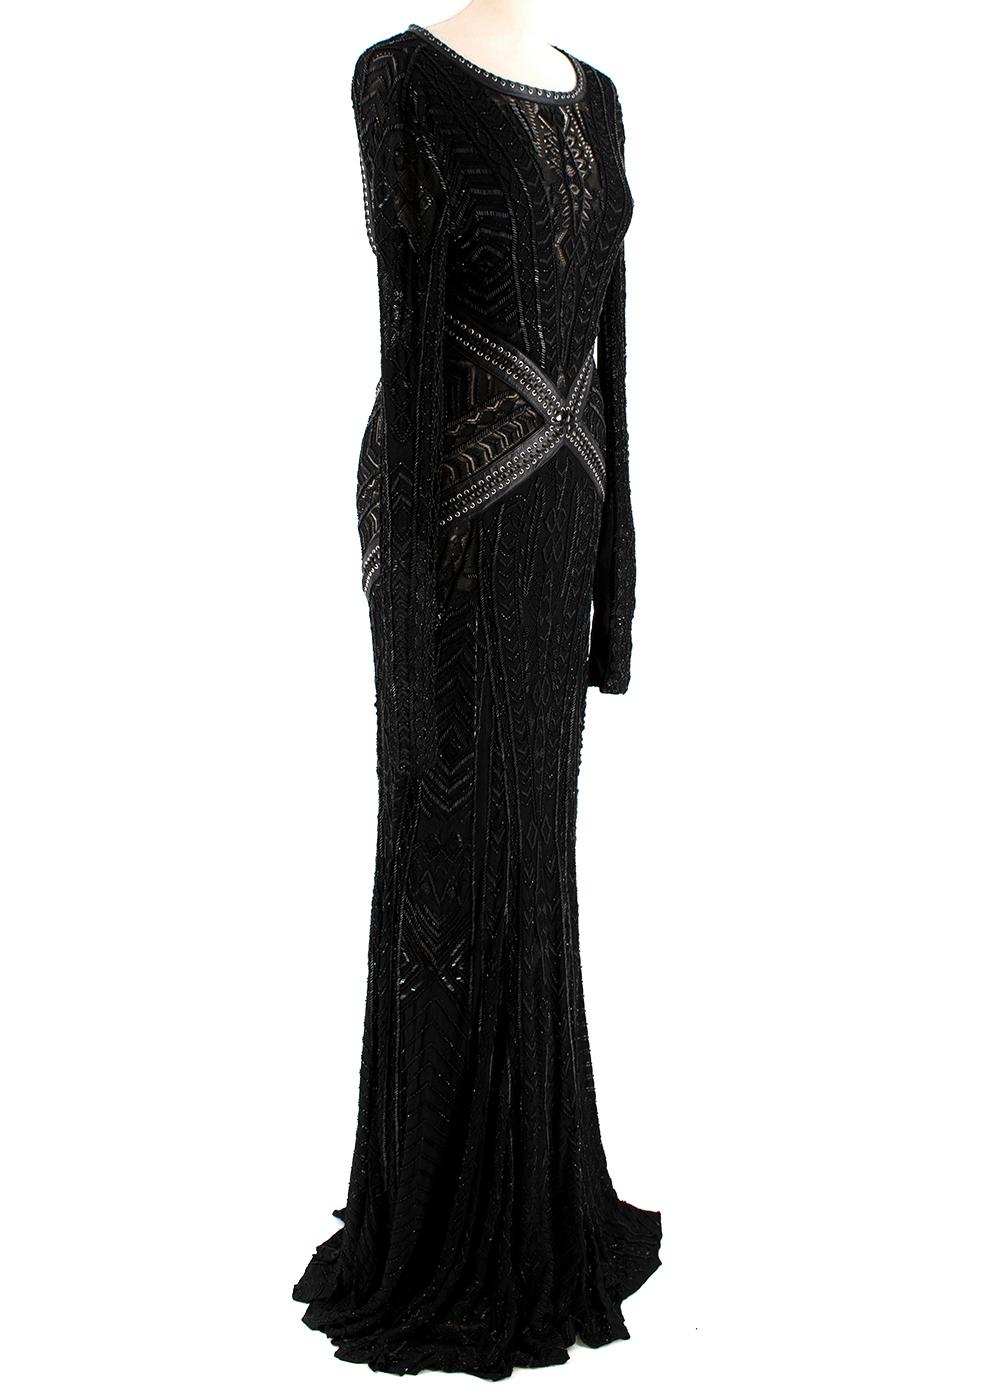 Roberto Cavalli Black Embroidered & Embellished Leather Detailed Gown

- Heavily embellished with multi-patterned sequins all over the dress
- Wide neck trimmed with leather woven detailing & silver eyelets. Same detailing to the waist
- Sheer